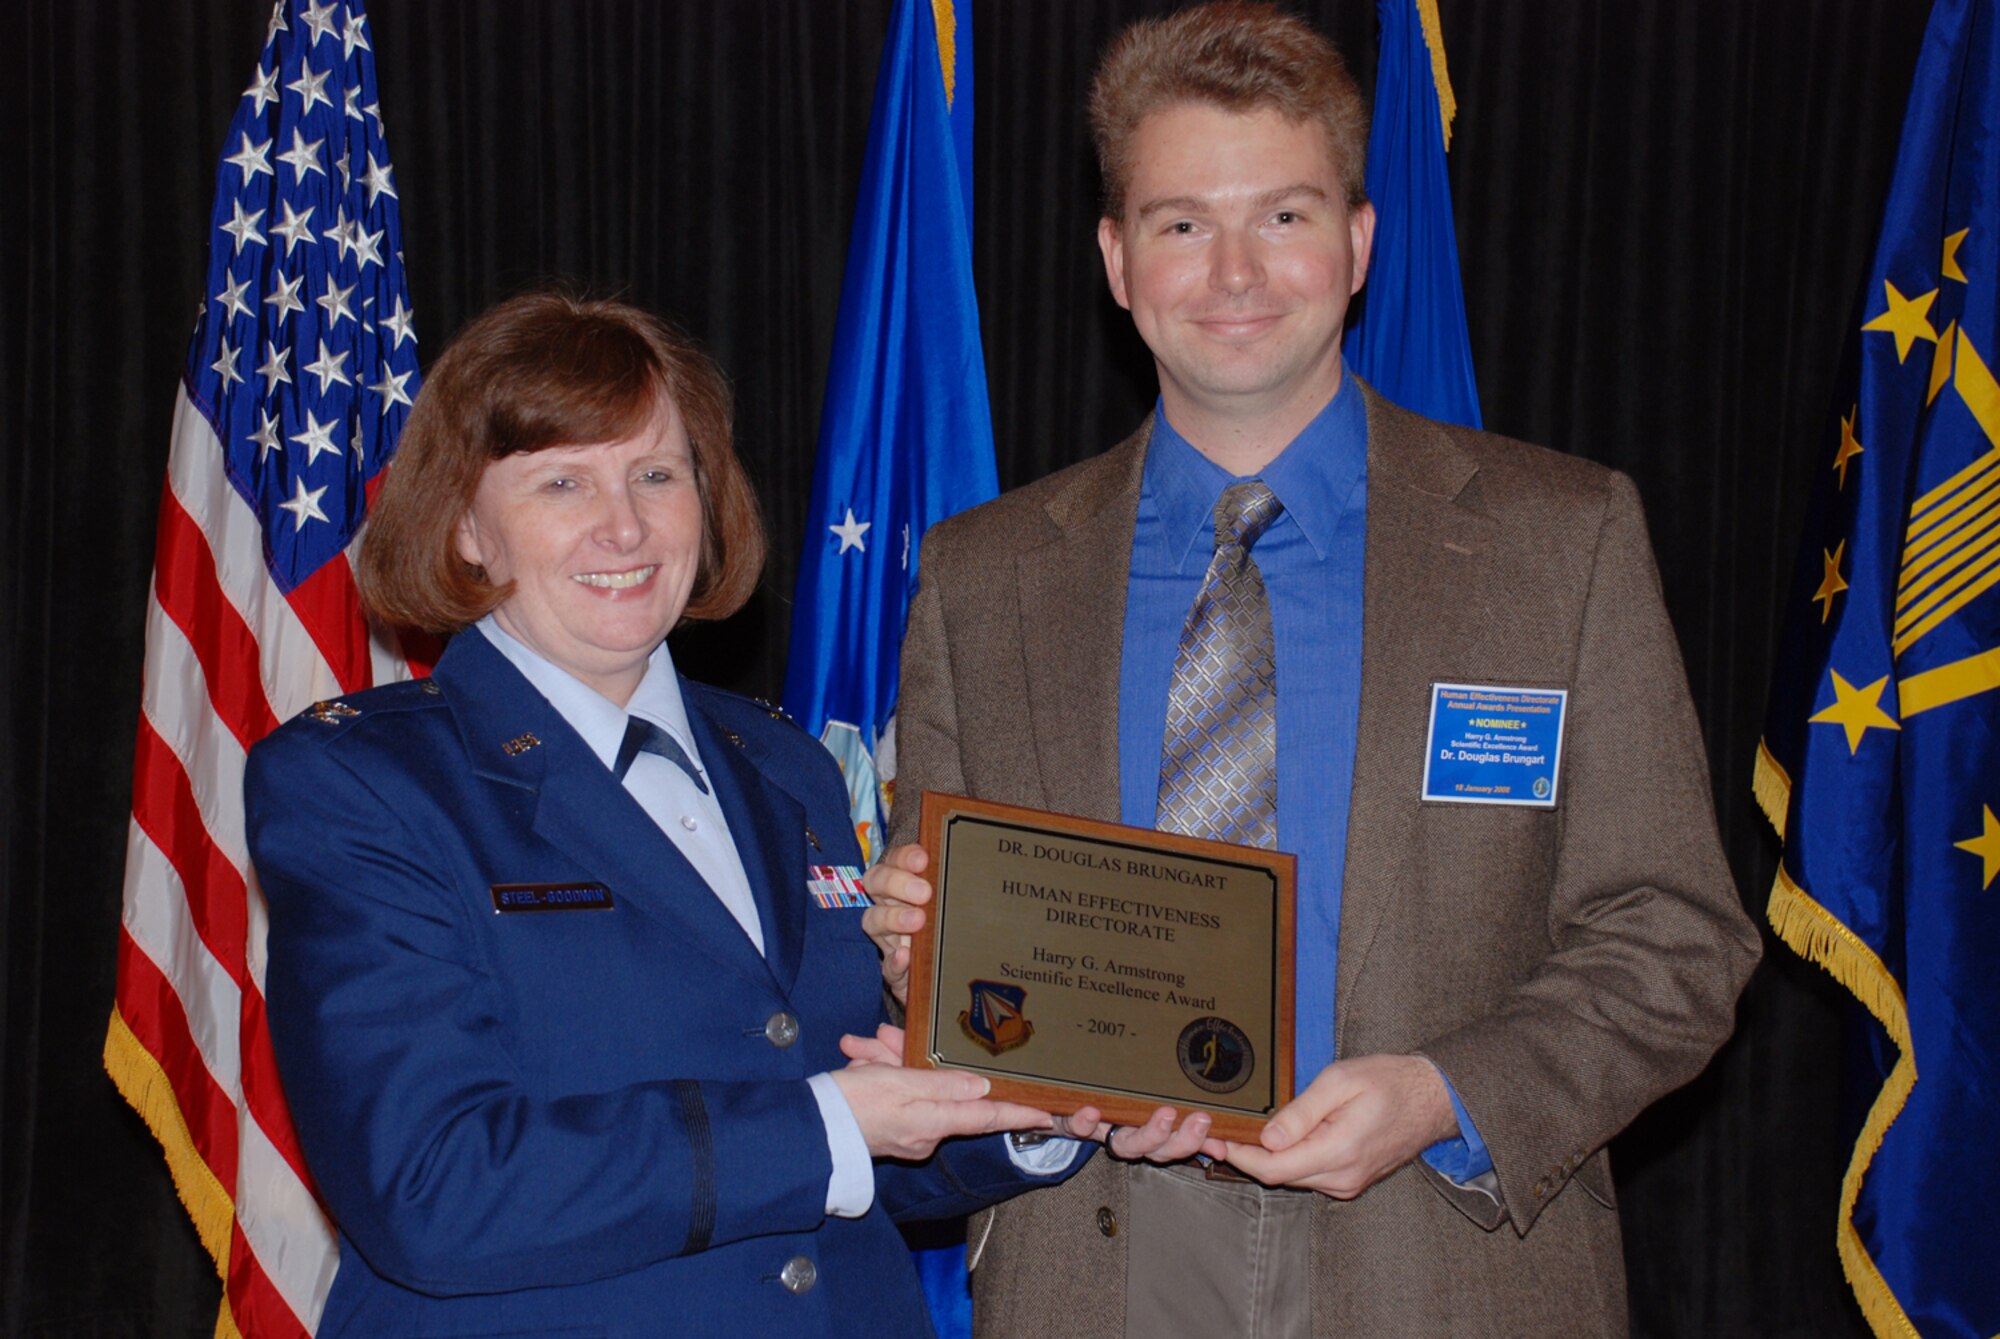 Colonel Linda Steel-Goodwin (left), deputy director of the Air Force Research Laboratory’s Human Effectiveness Directorate (AFRL/RH), presents the Harry G. Armstrong Award to 2007 winner Dr. Douglas Brungart, principal computer engineer with AFRL/RH’s Warfighter Interface Division, Battlespace Acoustics Branch, January 18 at the directorate’s annual awards luncheon. (Photo by Chris Gulliford, AFRL/RH)